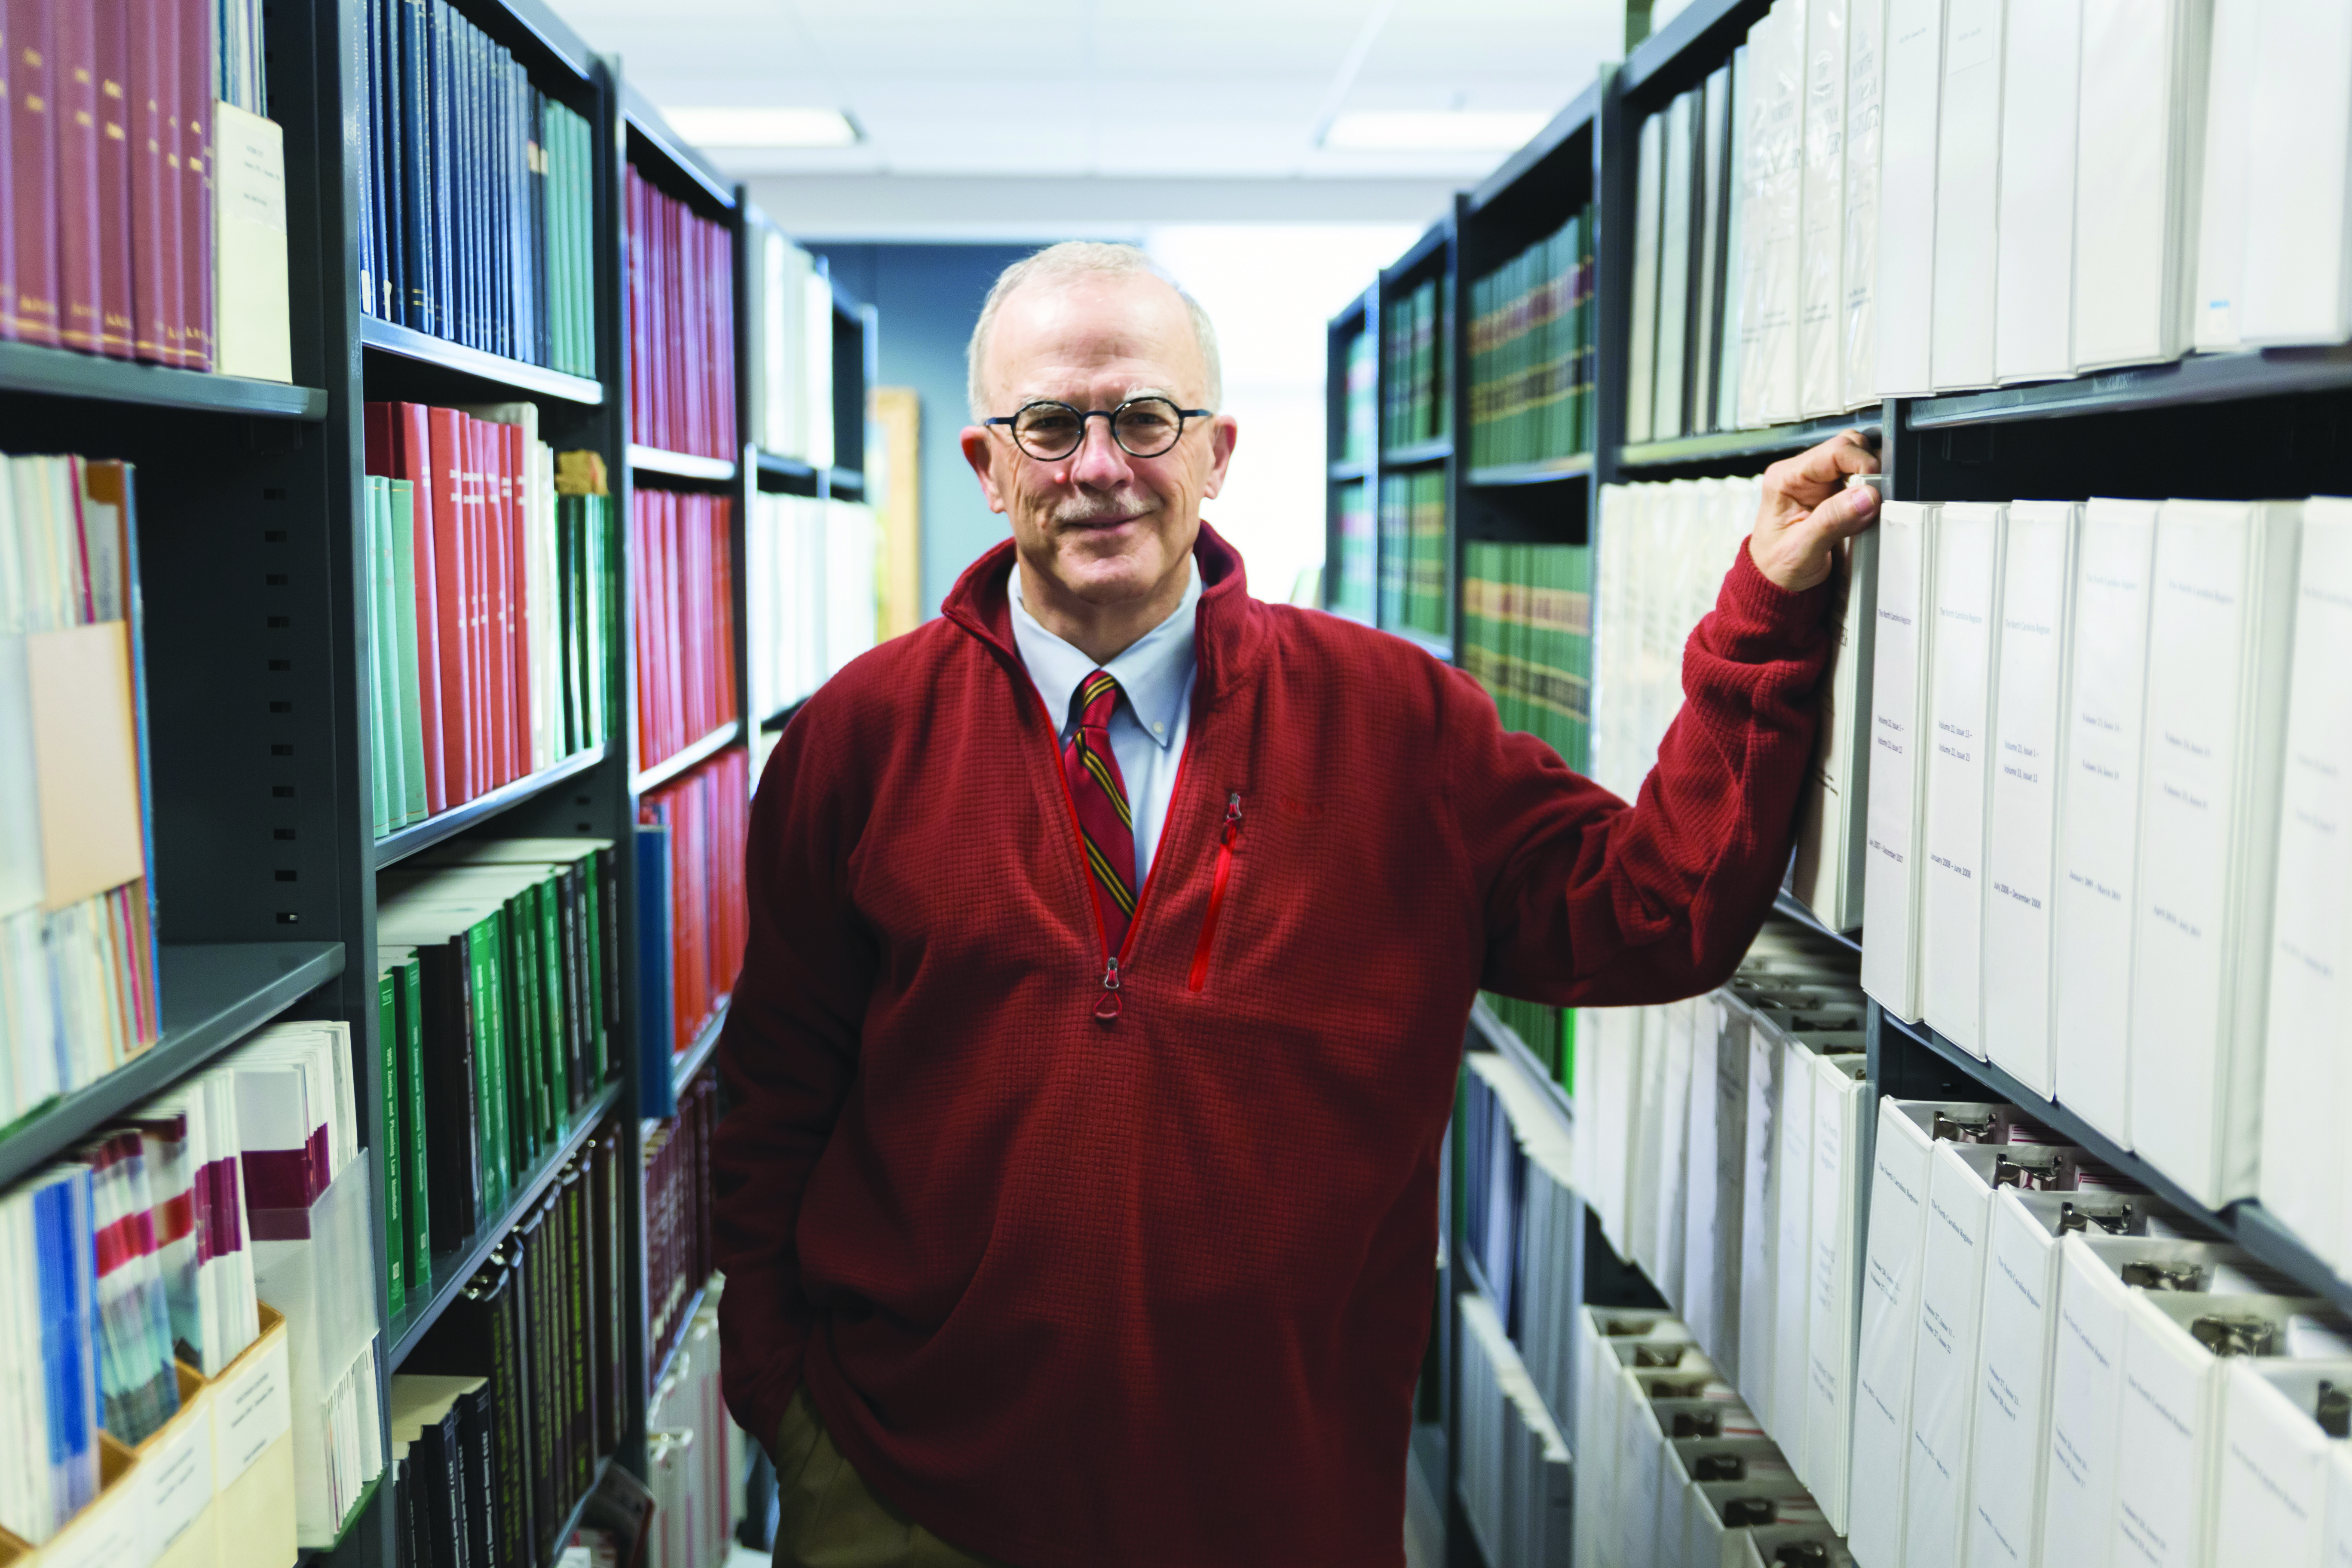 Dean Mike Smith stands in the Knapp Library, flanked on either side by bookshelves.